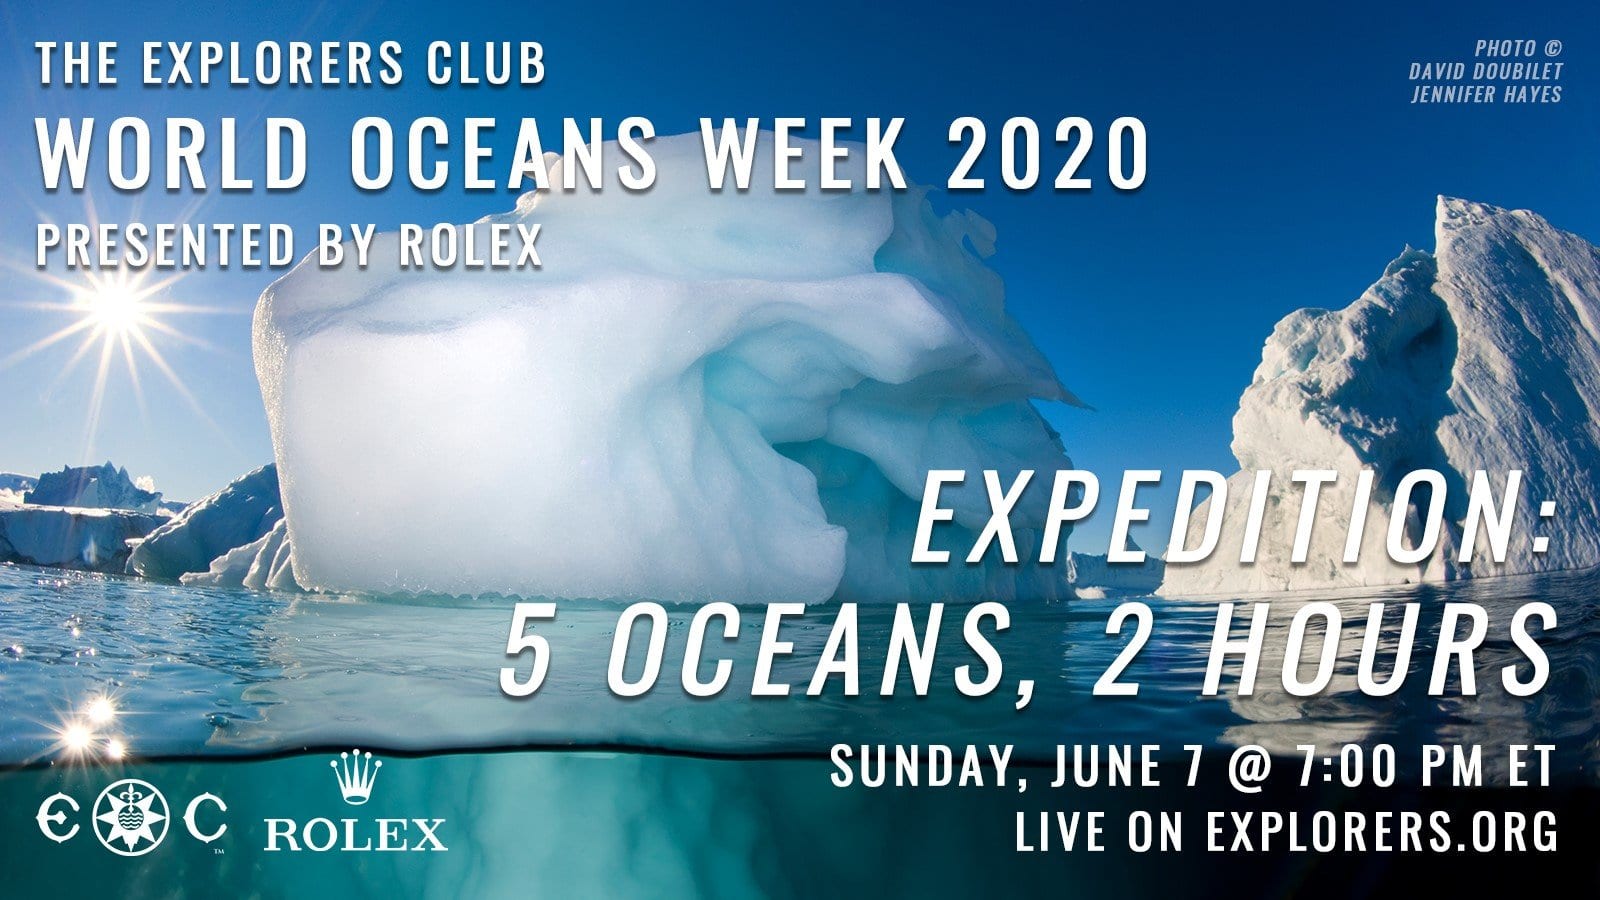 THE EXPLORERS CLUB WORLD OCEANS WEEK 2020 "EXPEDITION: 5 OCEANS, 2 HOURS" 1